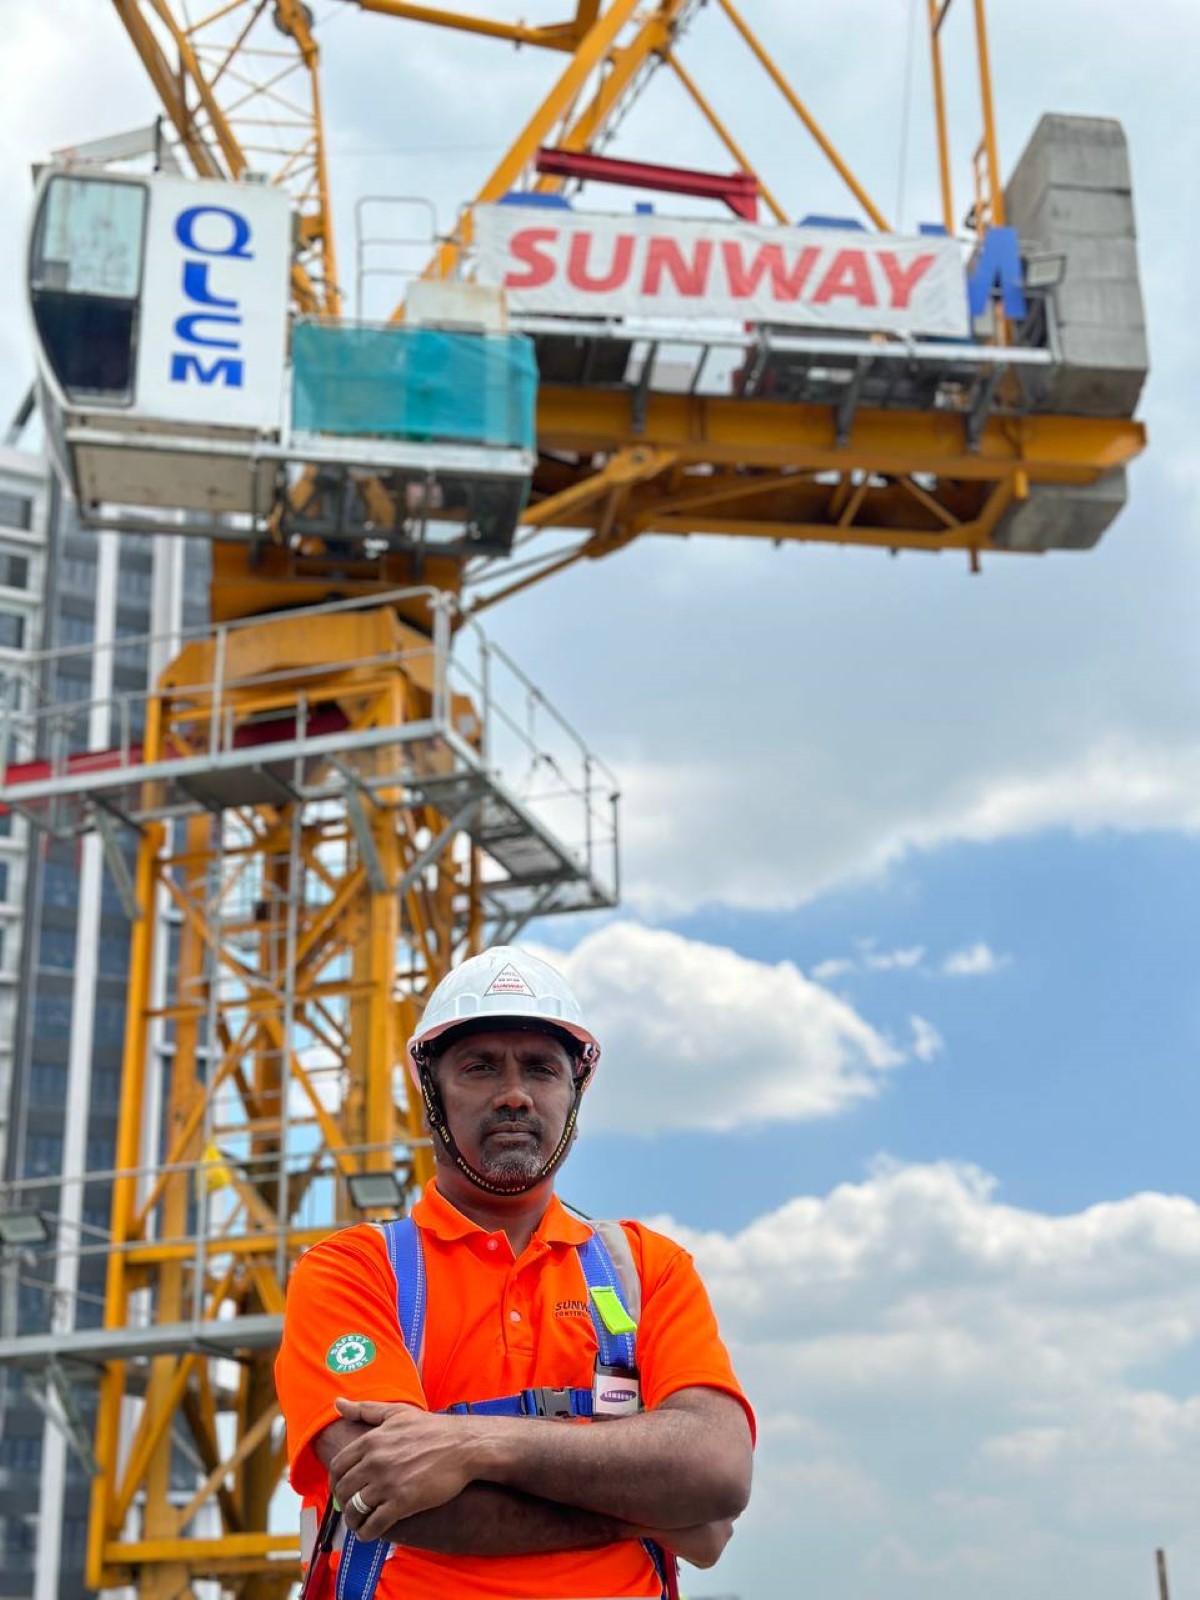 Sunway Construction’s Environment, Safety and Health (ESH) general manager Mr. Kalaiselvan wearing a white hard hat at a Sunway Construction site, with a crane and Sunway logo in the background